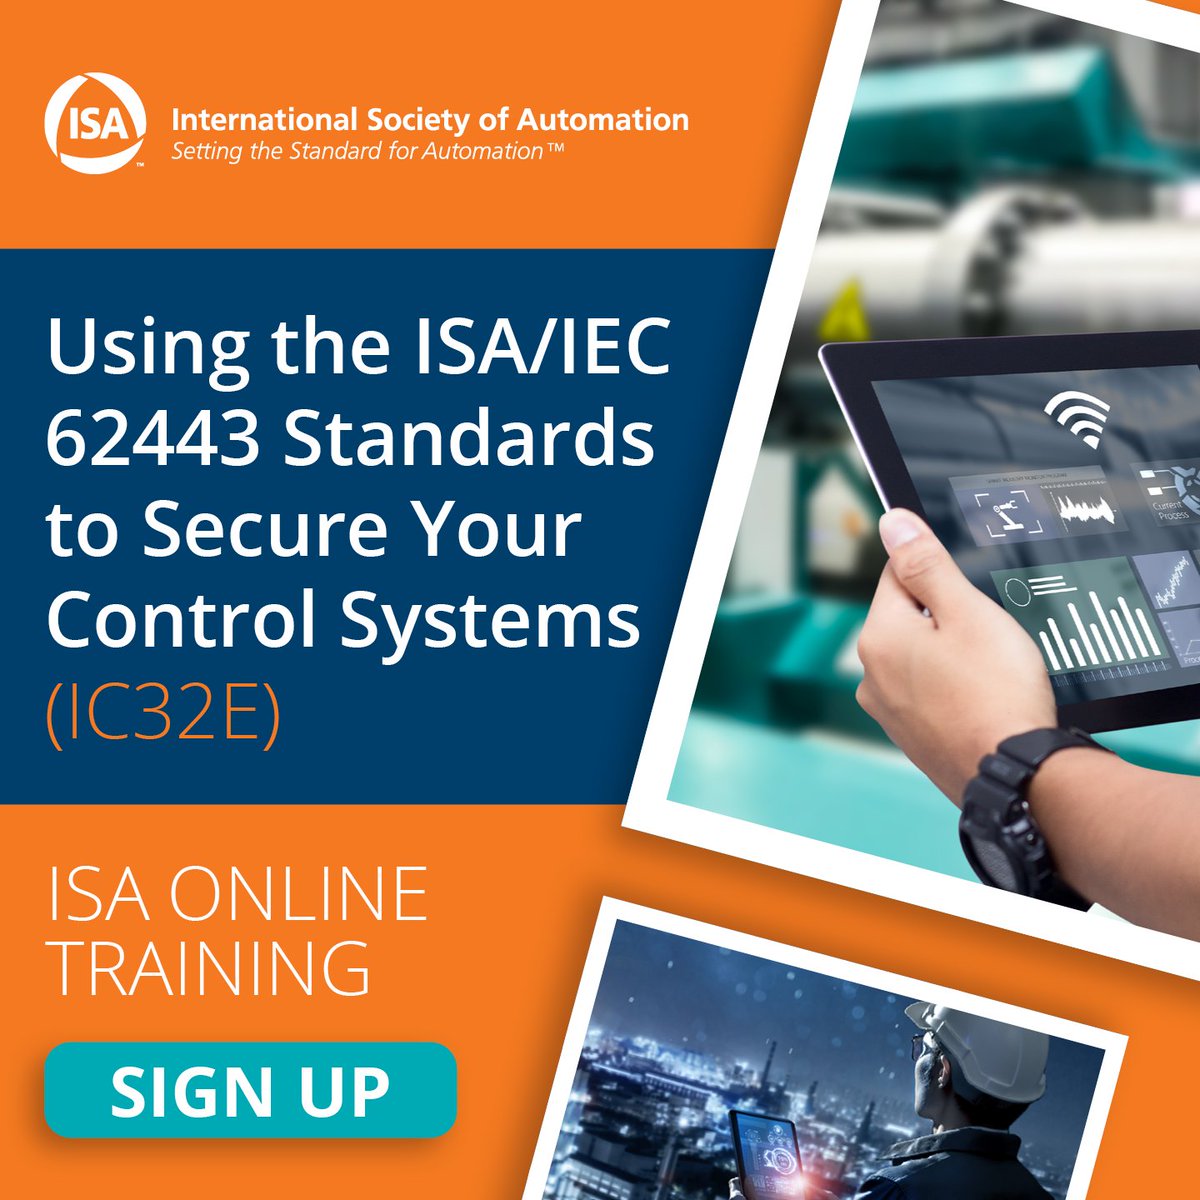 IC32E takes a detailed look at how the 62443 #cybersecurity standards protect critical #industrial control systems, the procedural & technical differences between IT and OT cybersecurity, & the various security ramifications of the move to open systems. myisa.my.site.com/ISA/s/communit…